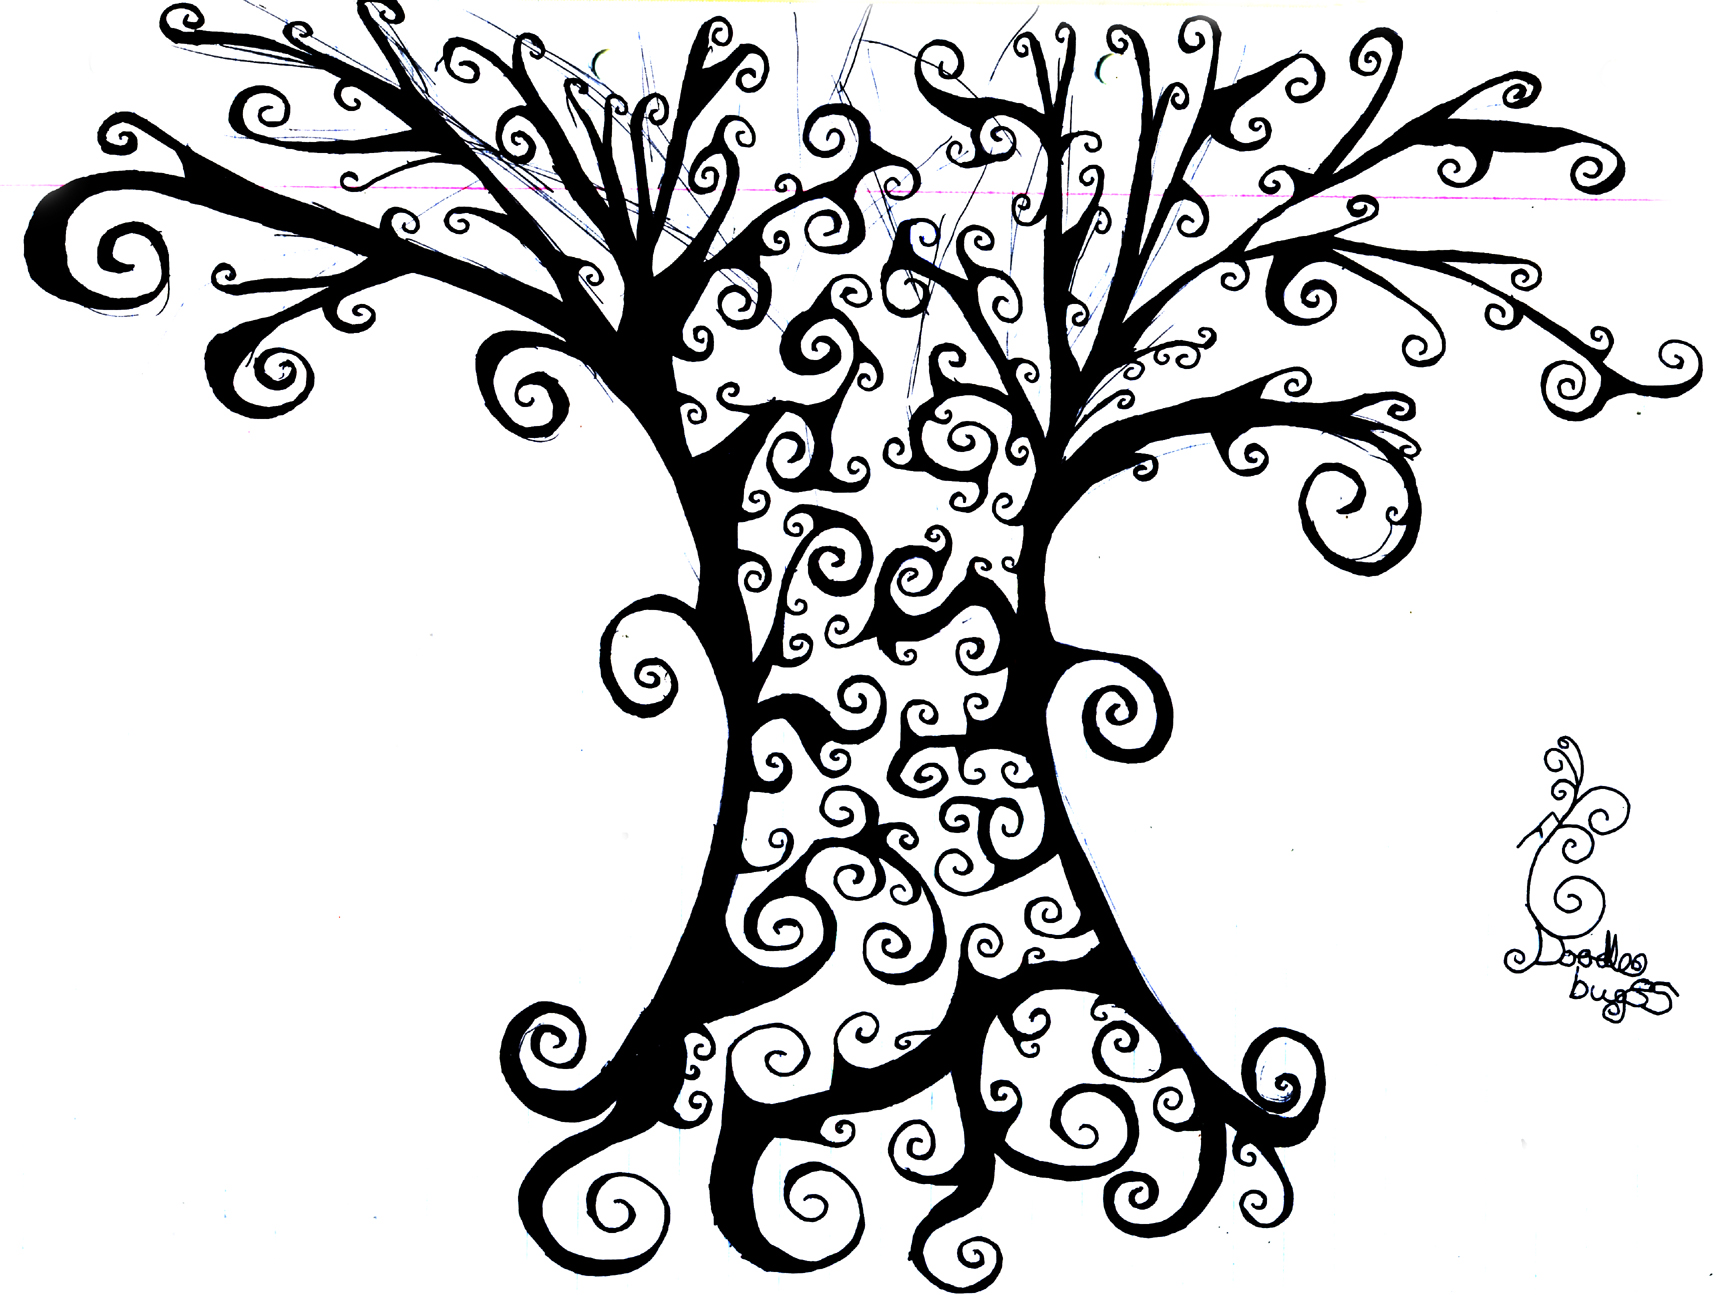 Tree Artwork Pictures - ClipArt Best